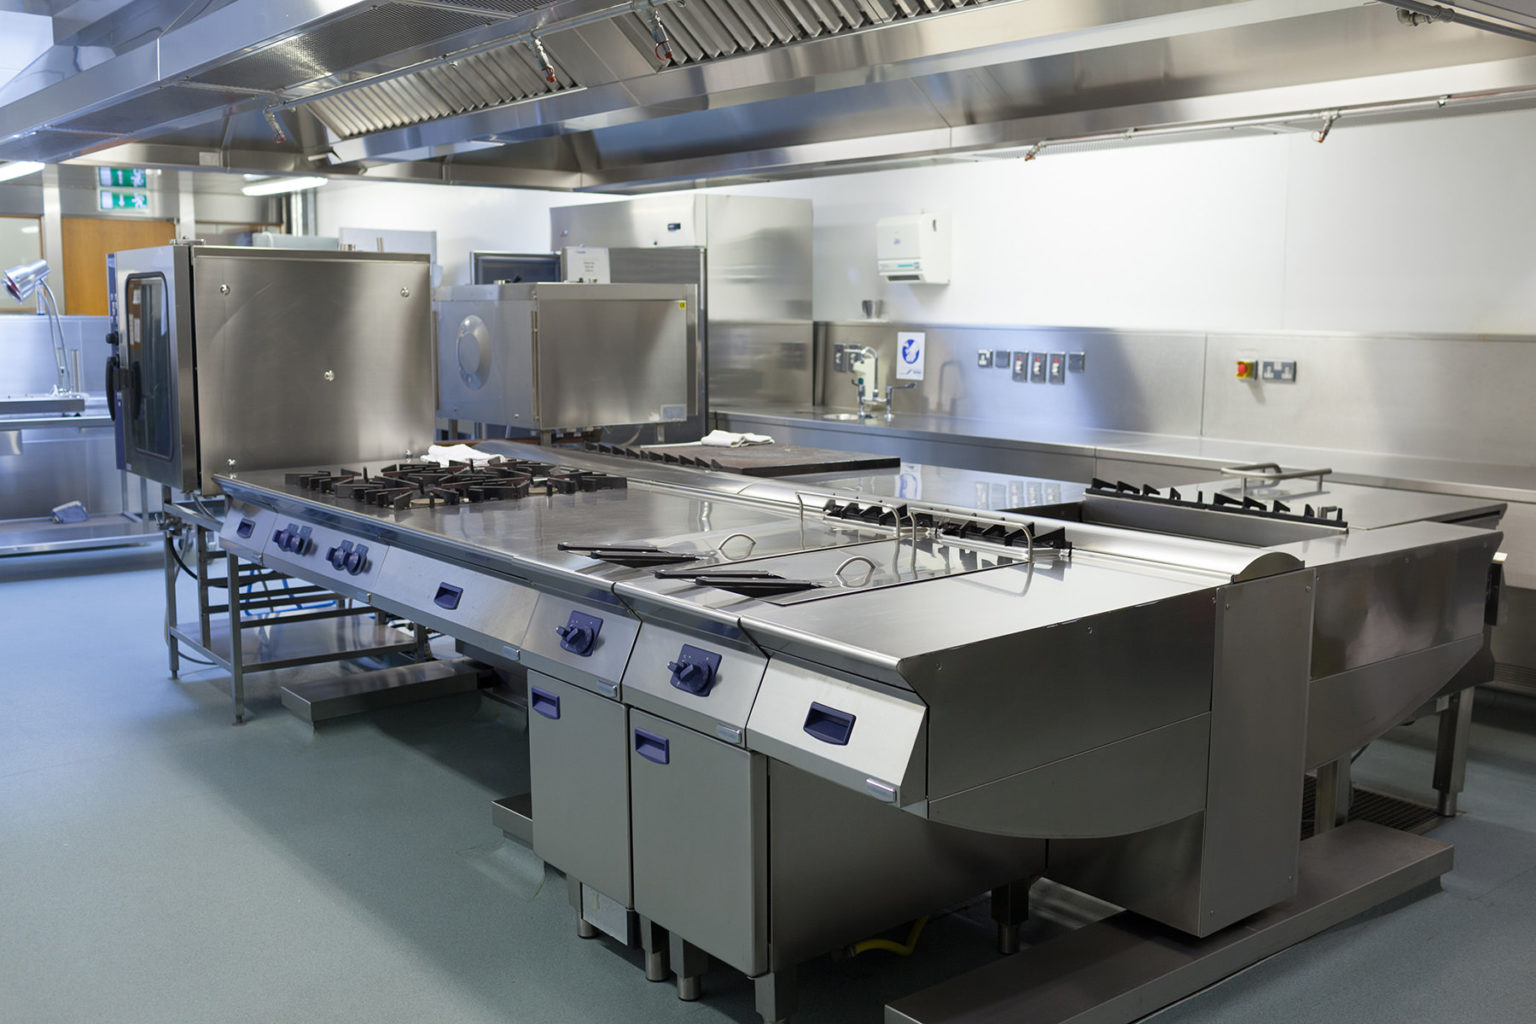 Picture of restaurant kitchen in chrome